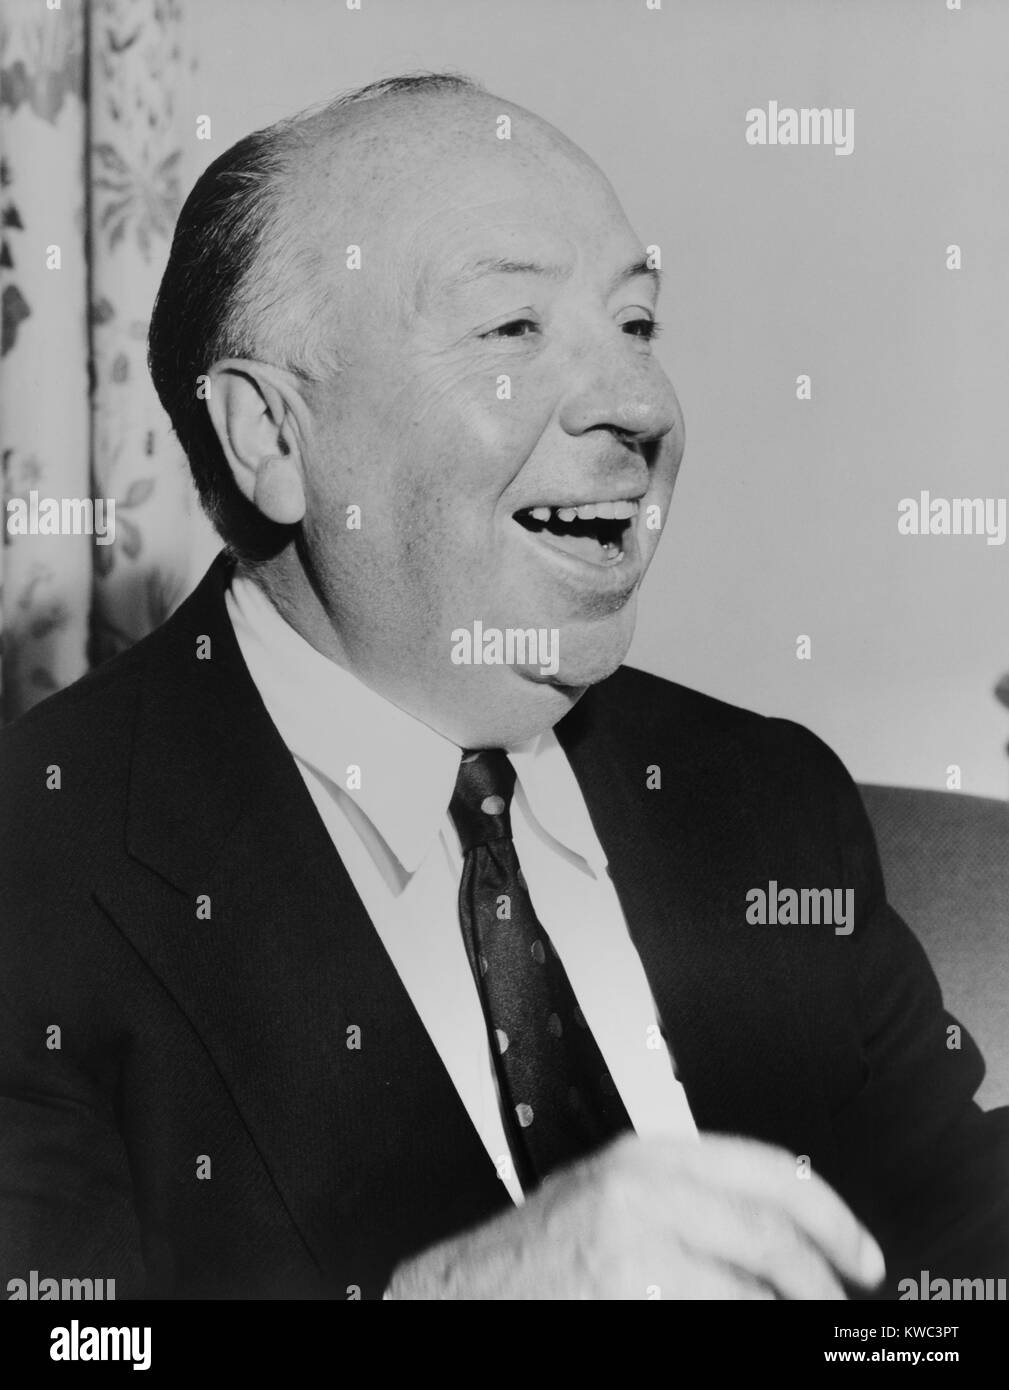 Film director Alfred Hitchcock laughing, 1956. (BSLOC 2015 14 170) Stock Photo